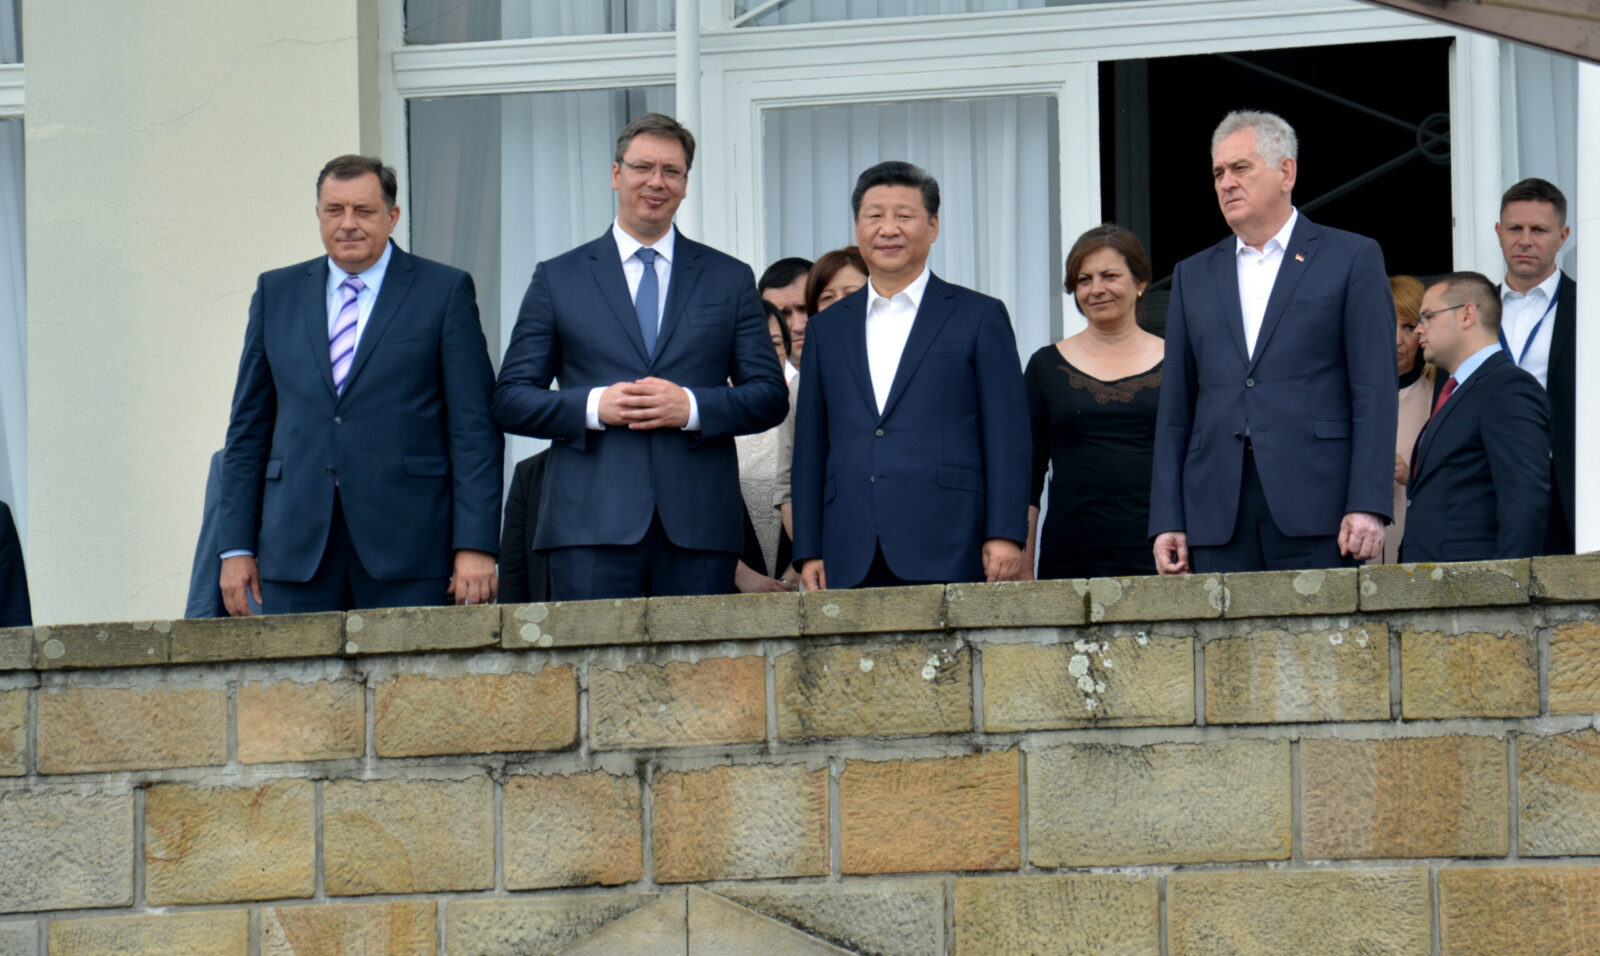 Serbia is under pressure from Chinese investments